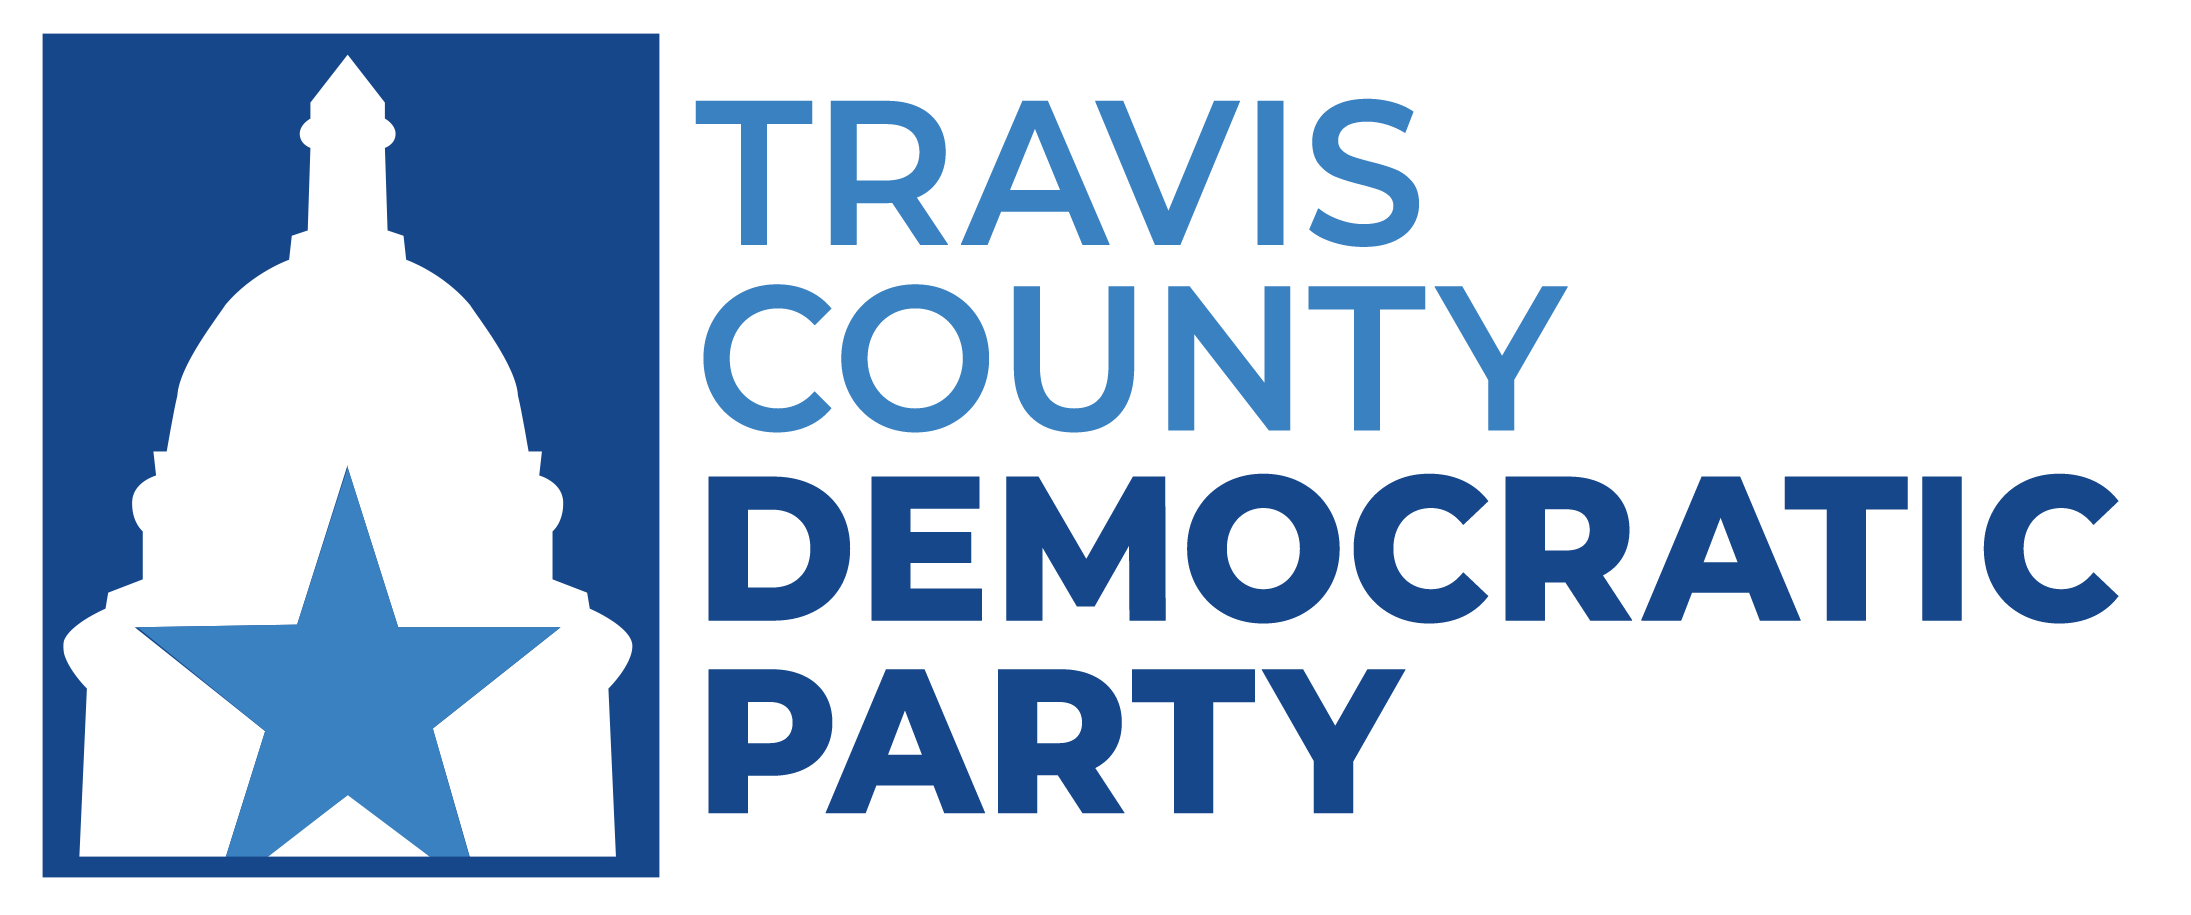 Kathryn Whitley Chu has been endorsed by the Travis County Democratic Party